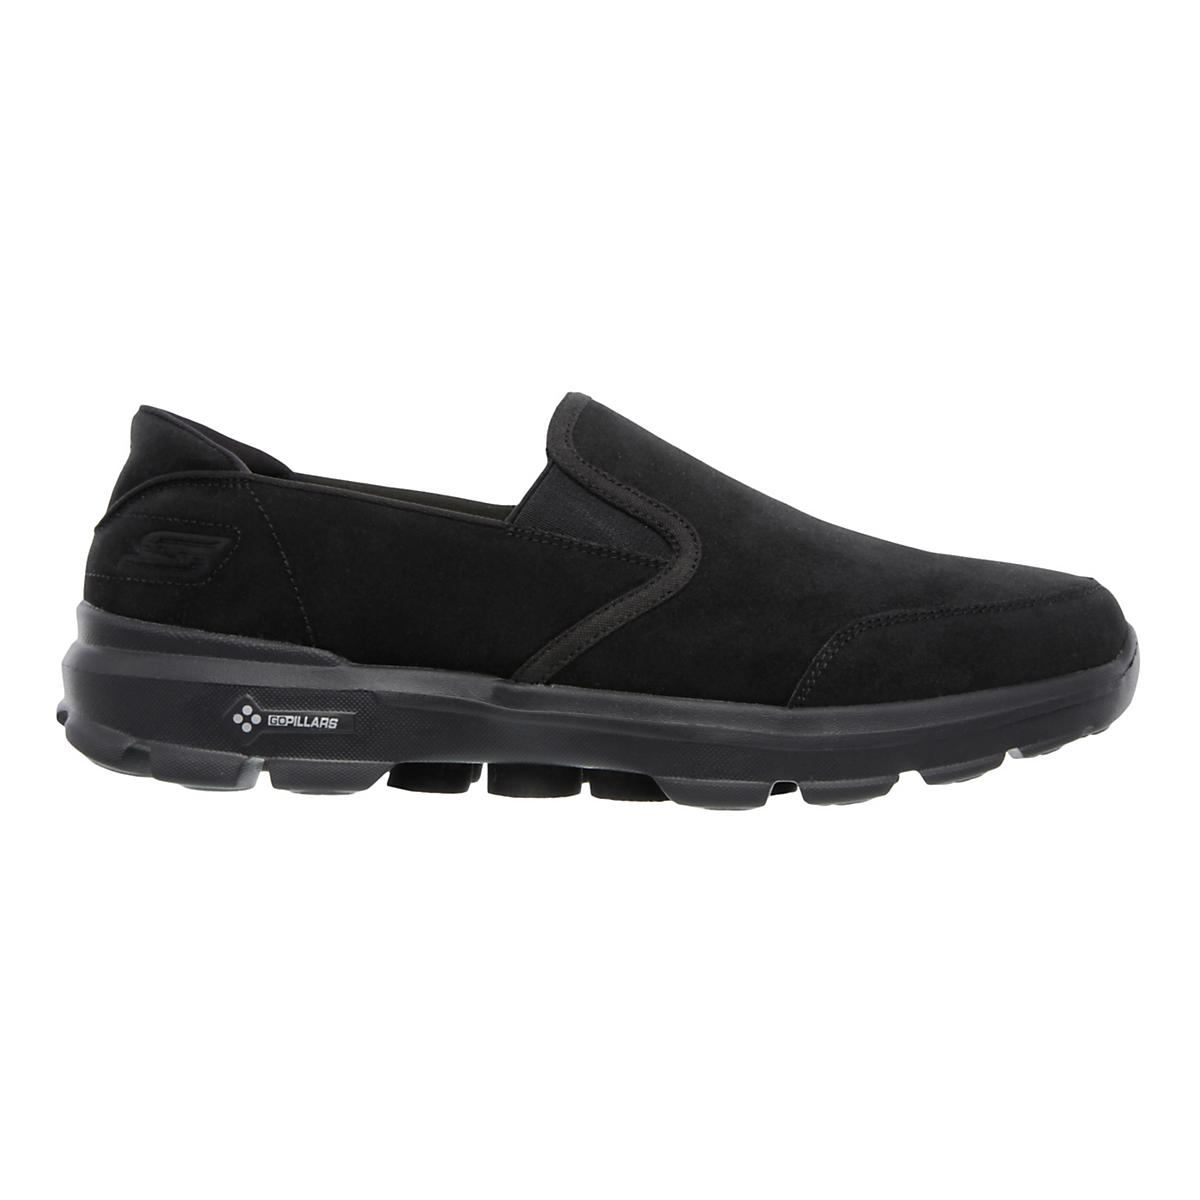 Mens Skechers GO Walk 3 Unfold Casual Shoe at Road Runner Sports